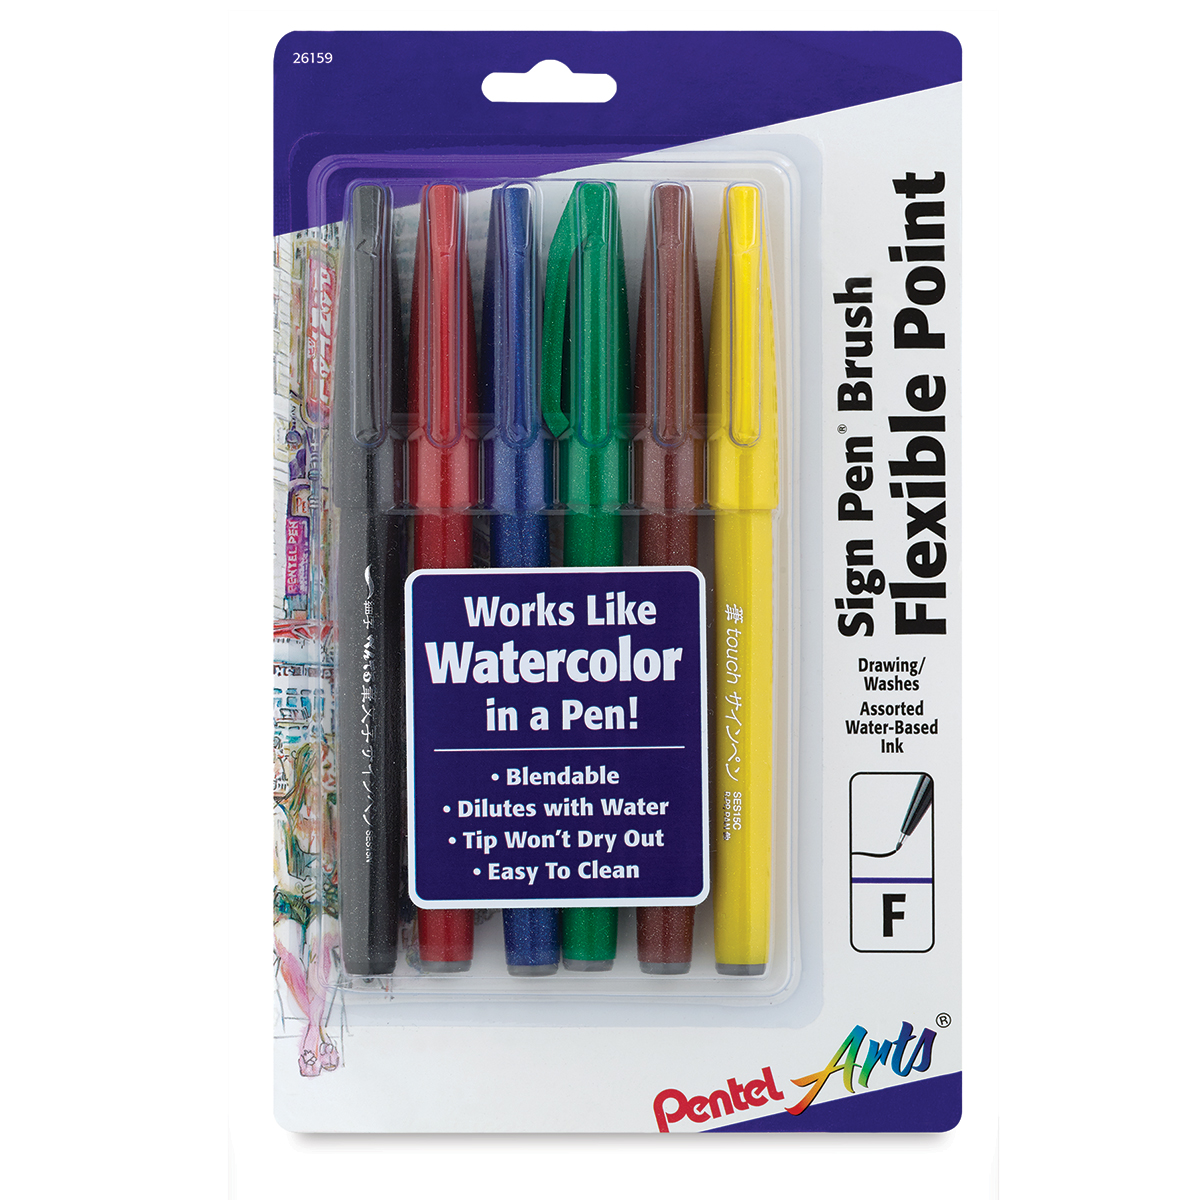 CDT Brush Sign Pens - 10-Pack, Assorted Colors